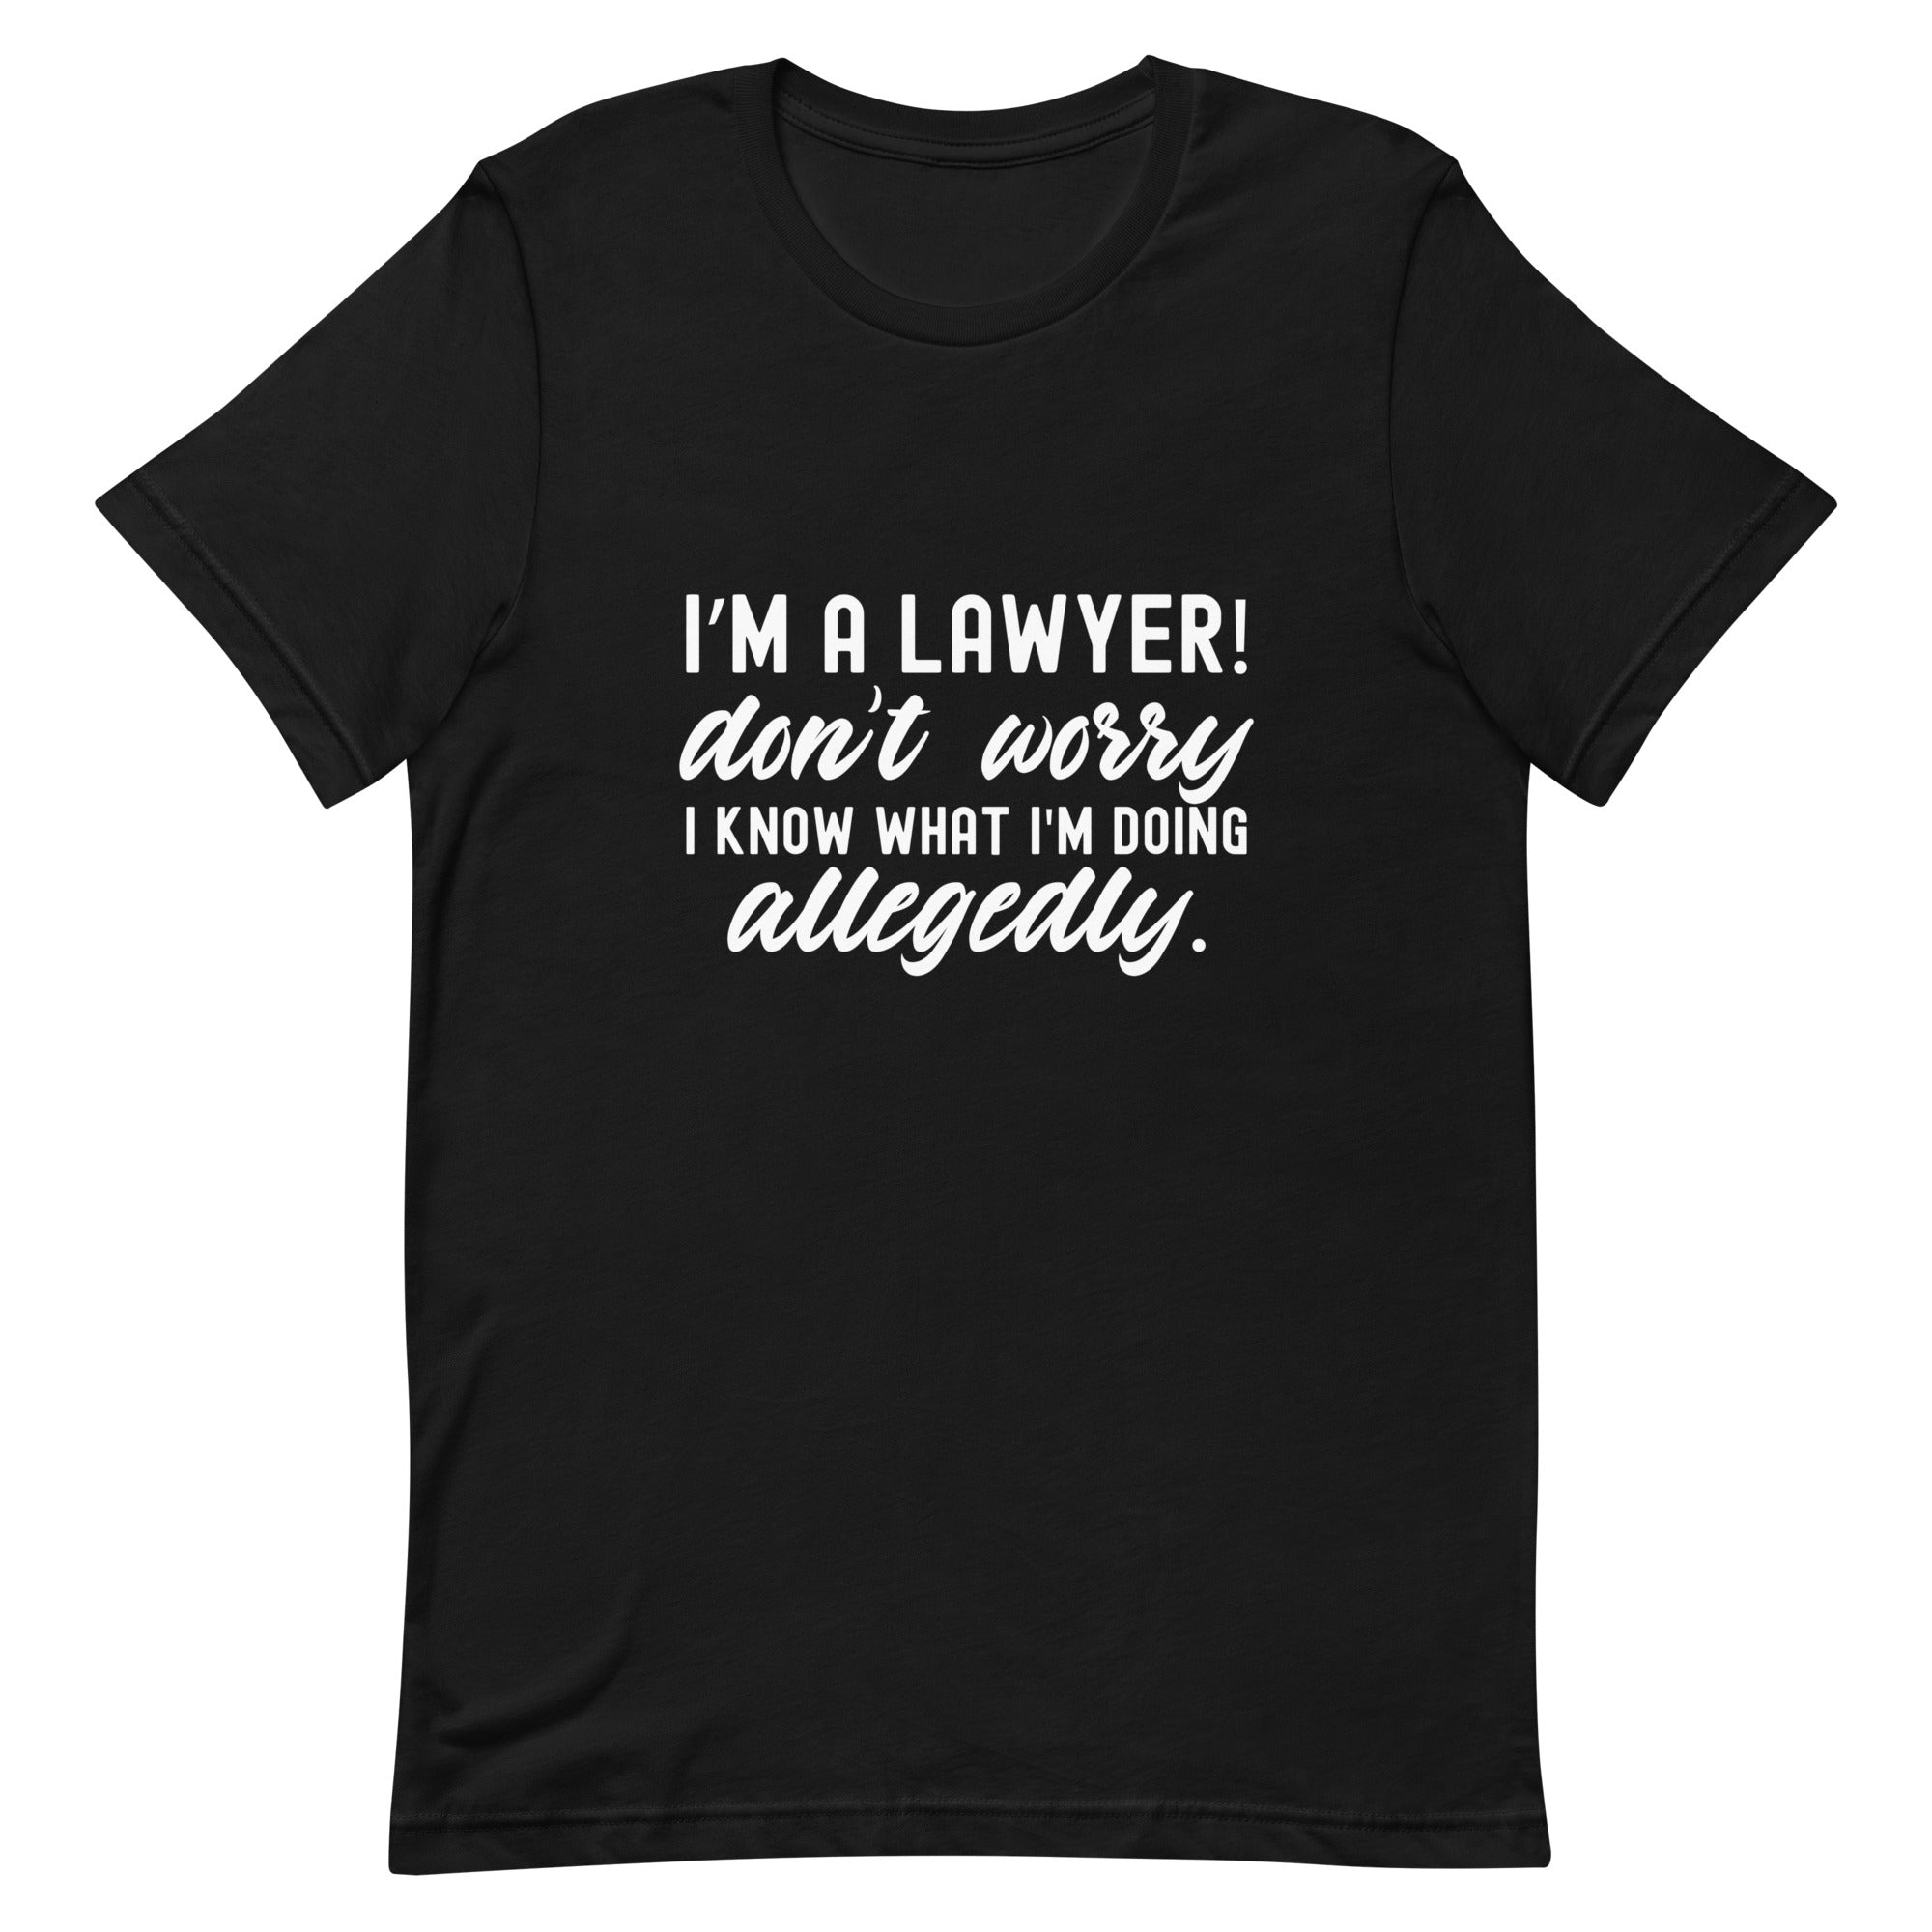 Unisex t-shirt |  I’m a lawyer don’t worry I know what I'm doing (allegedly)